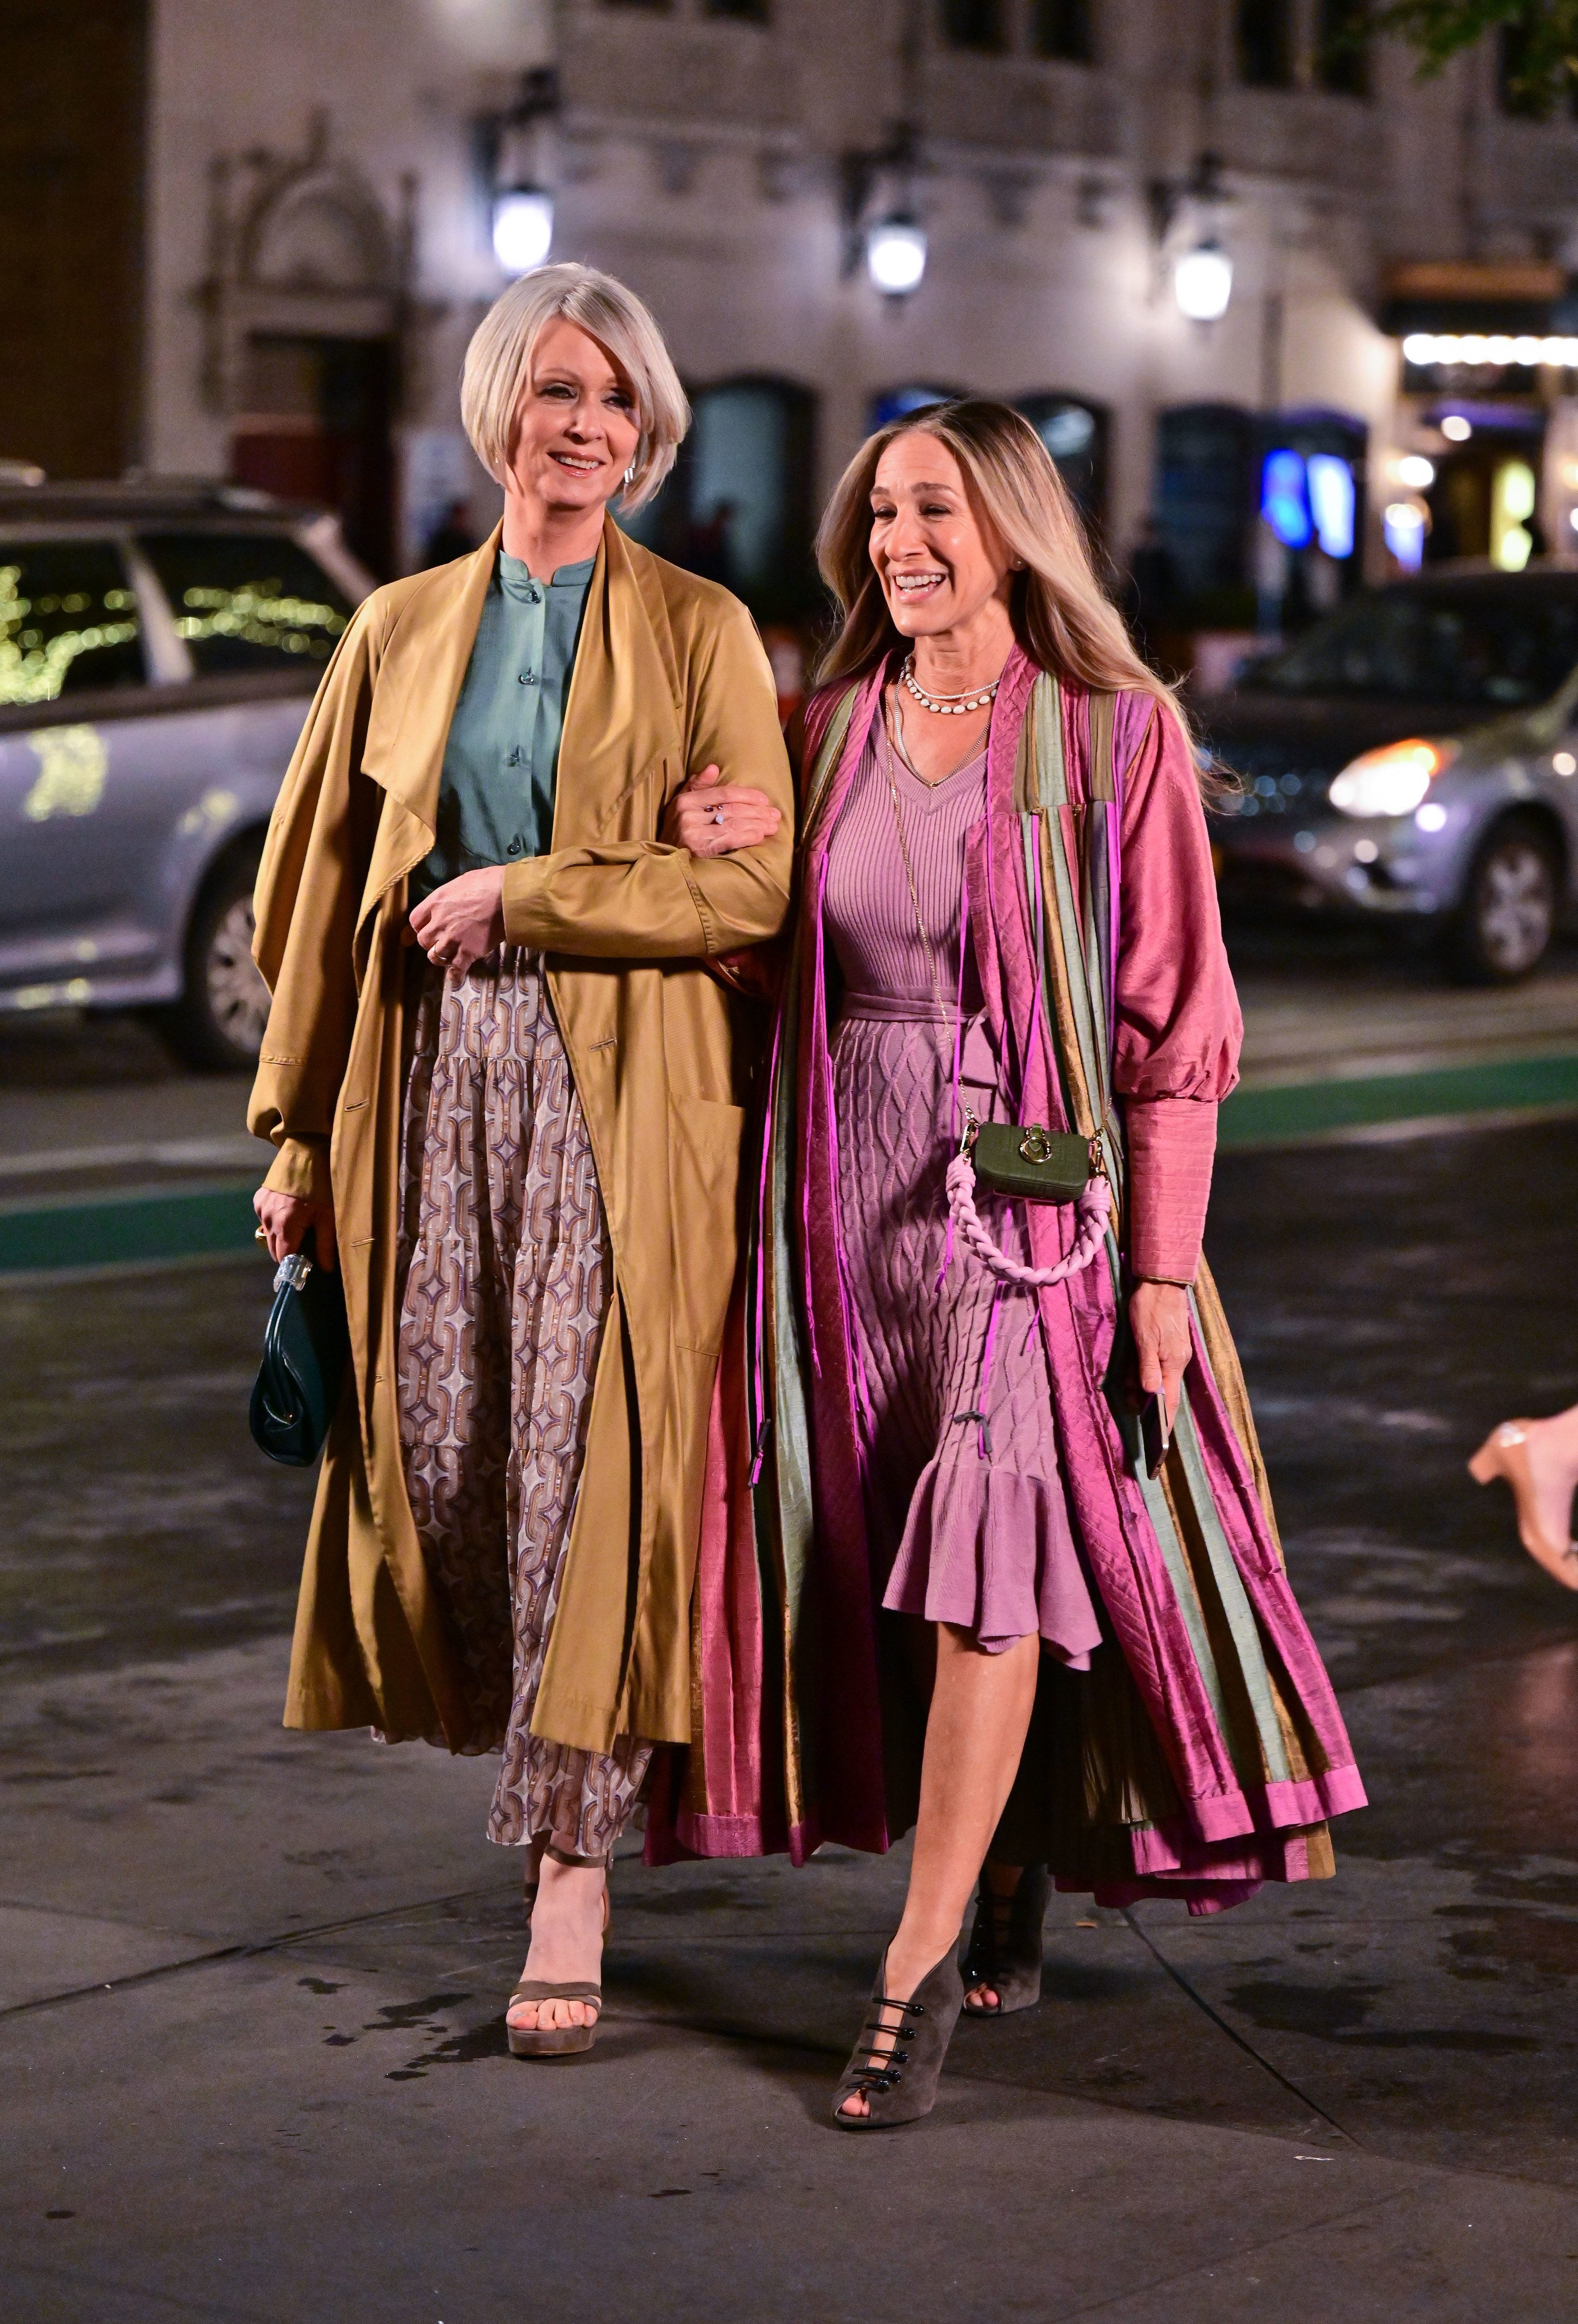 Miranda and Carrie walking down the street at night arm-in-arm